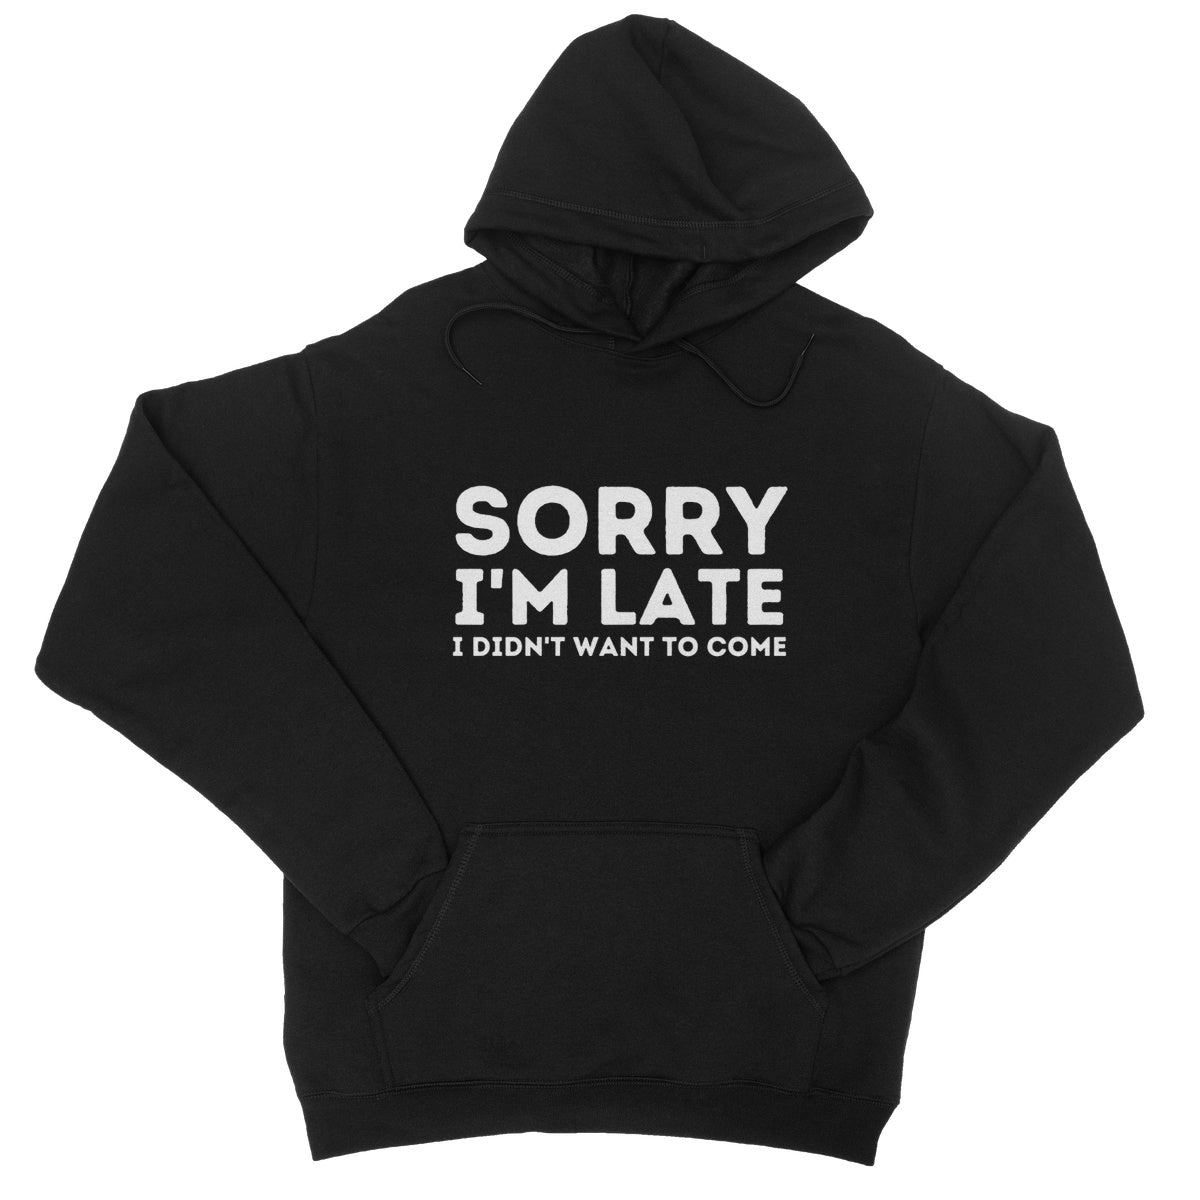 sorry I'm late I didn't want to come hoodie black